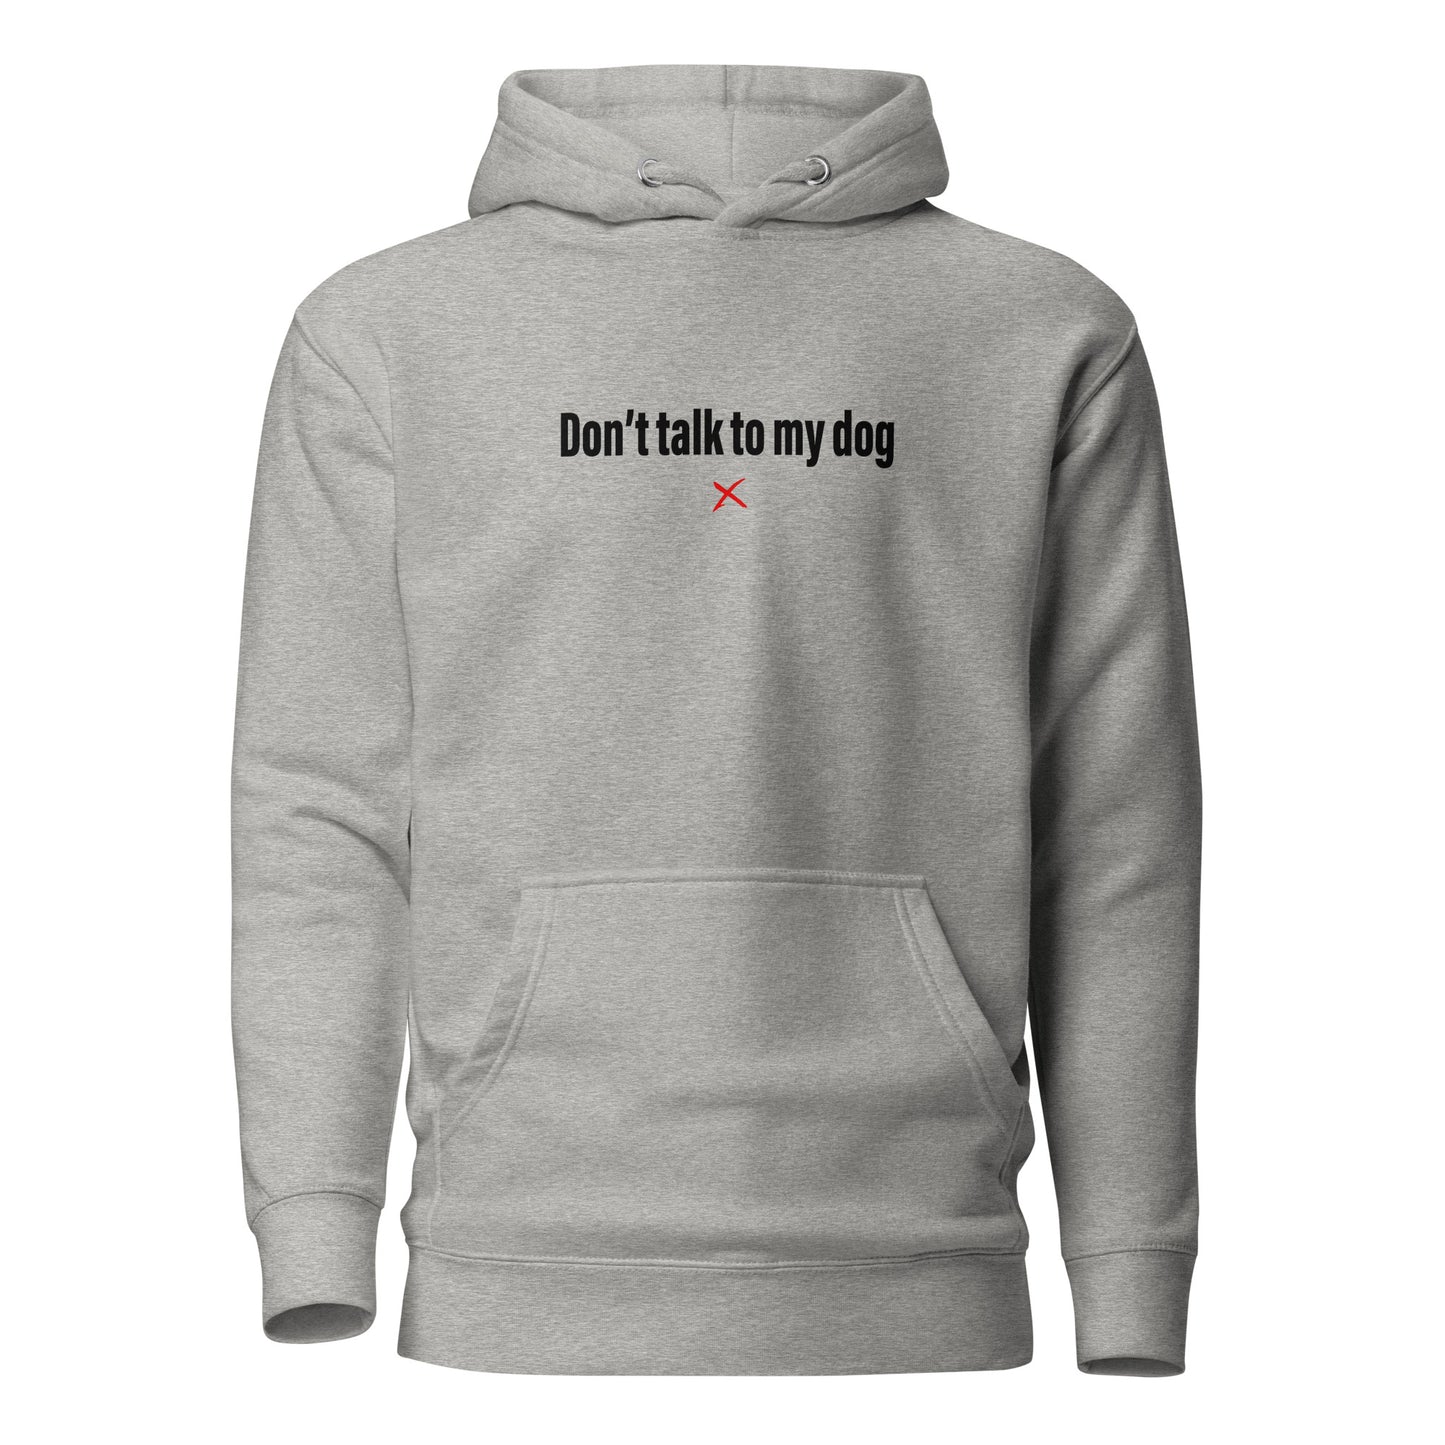 Don't talk to my dog - Hoodie